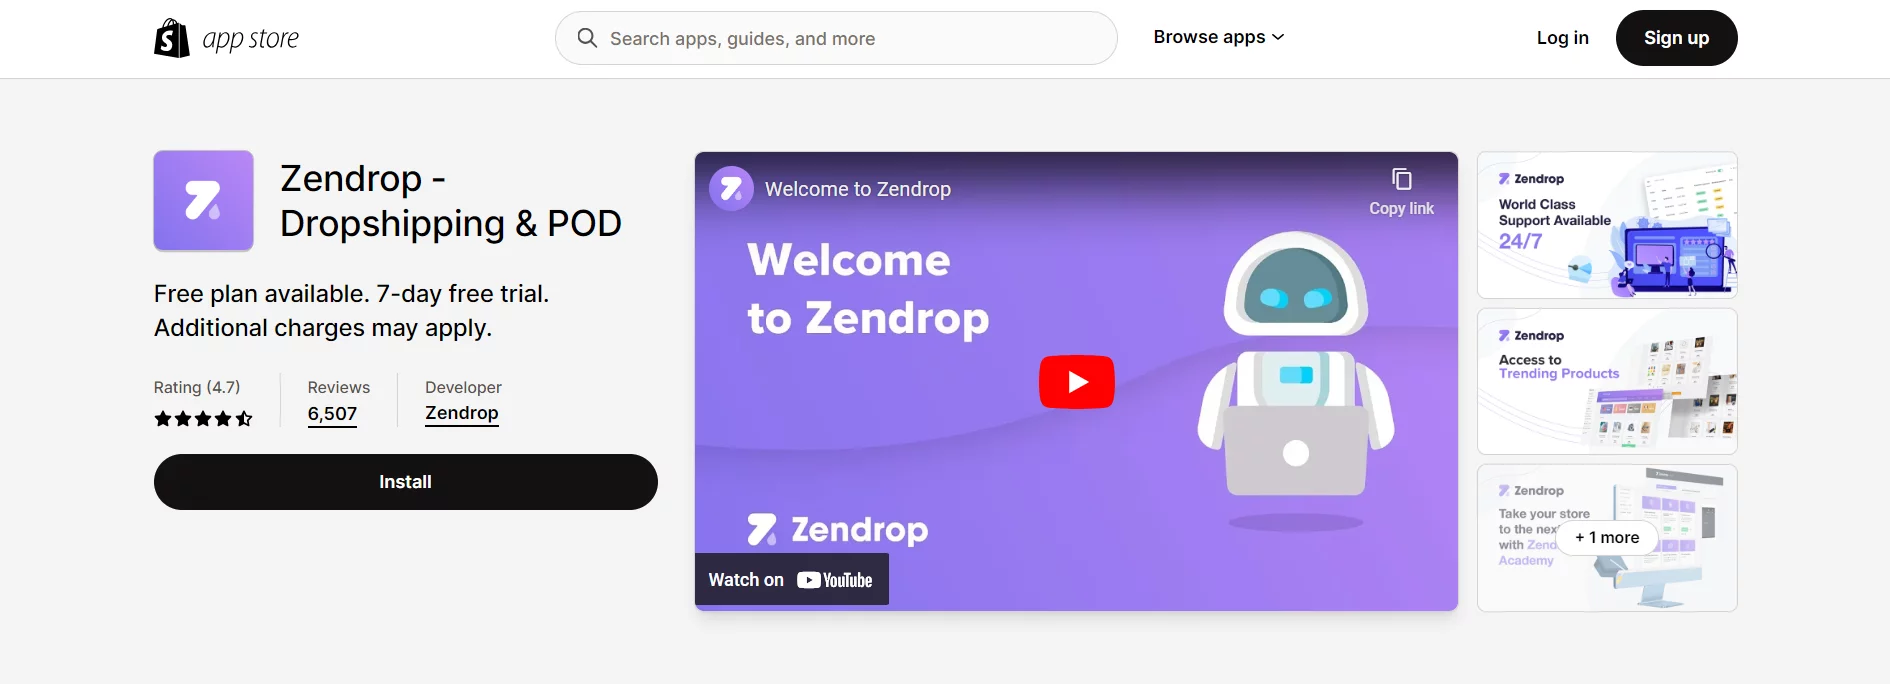 Zendrop - Dropshipping and POD - Highest Reviews - (4.7/5 - 6,503)